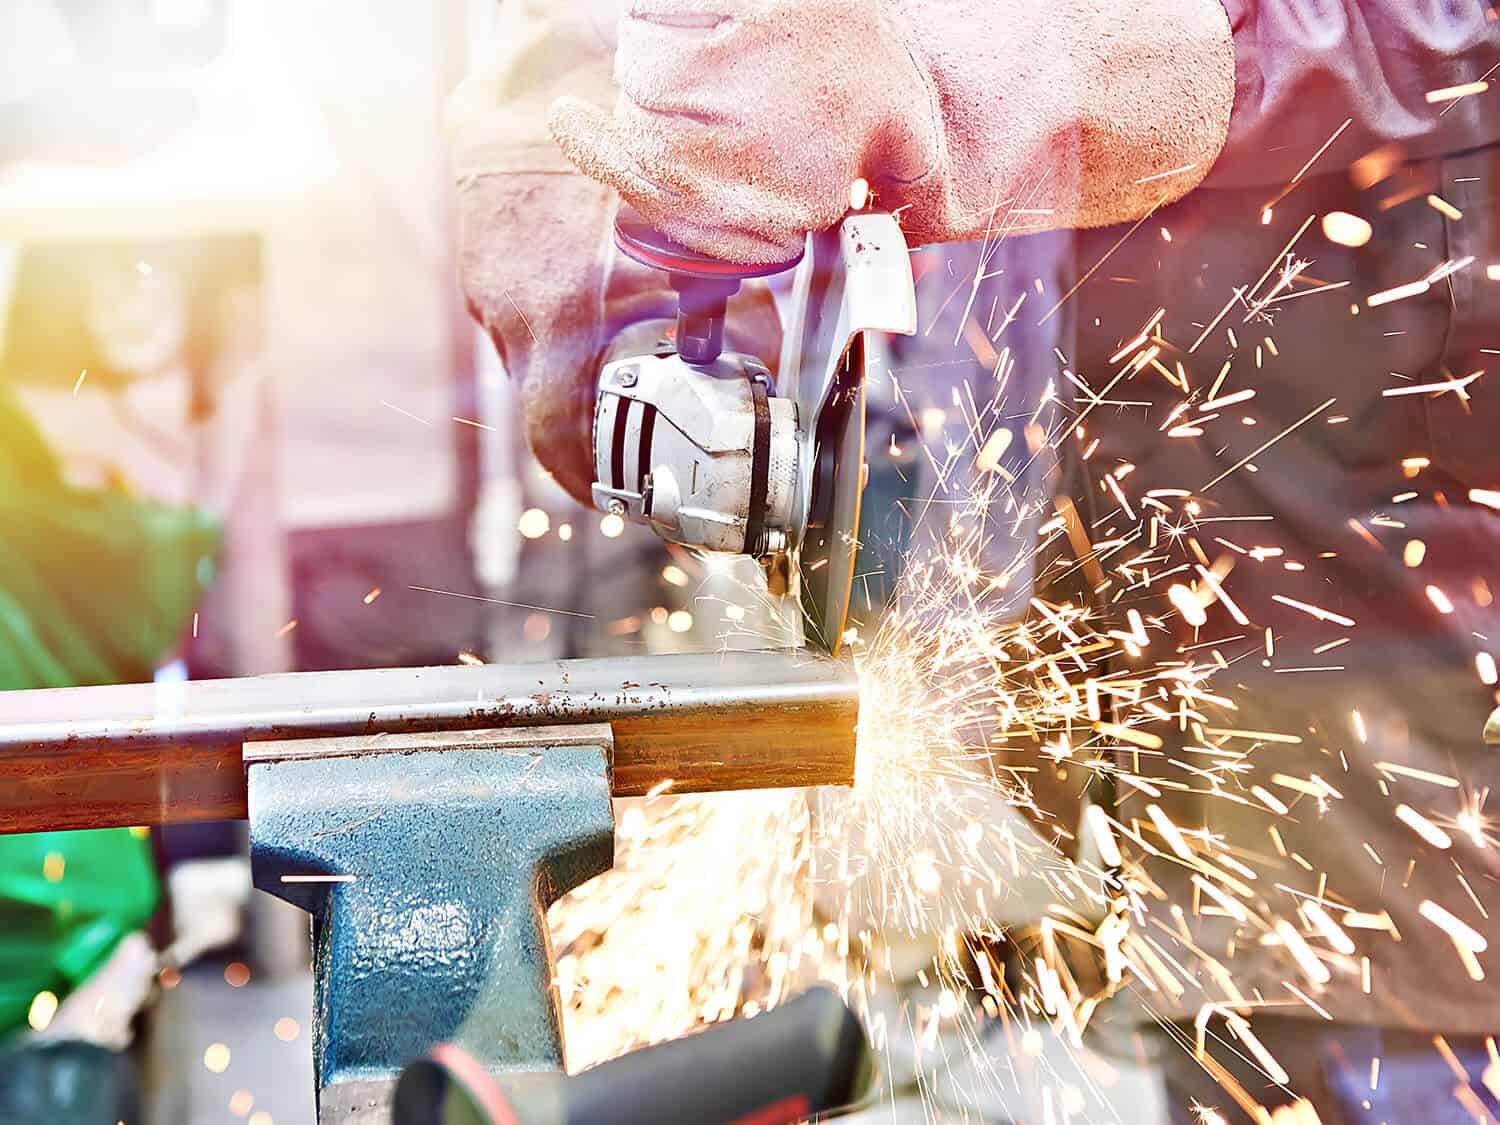 How to Cut Metal With an Angle Grinder